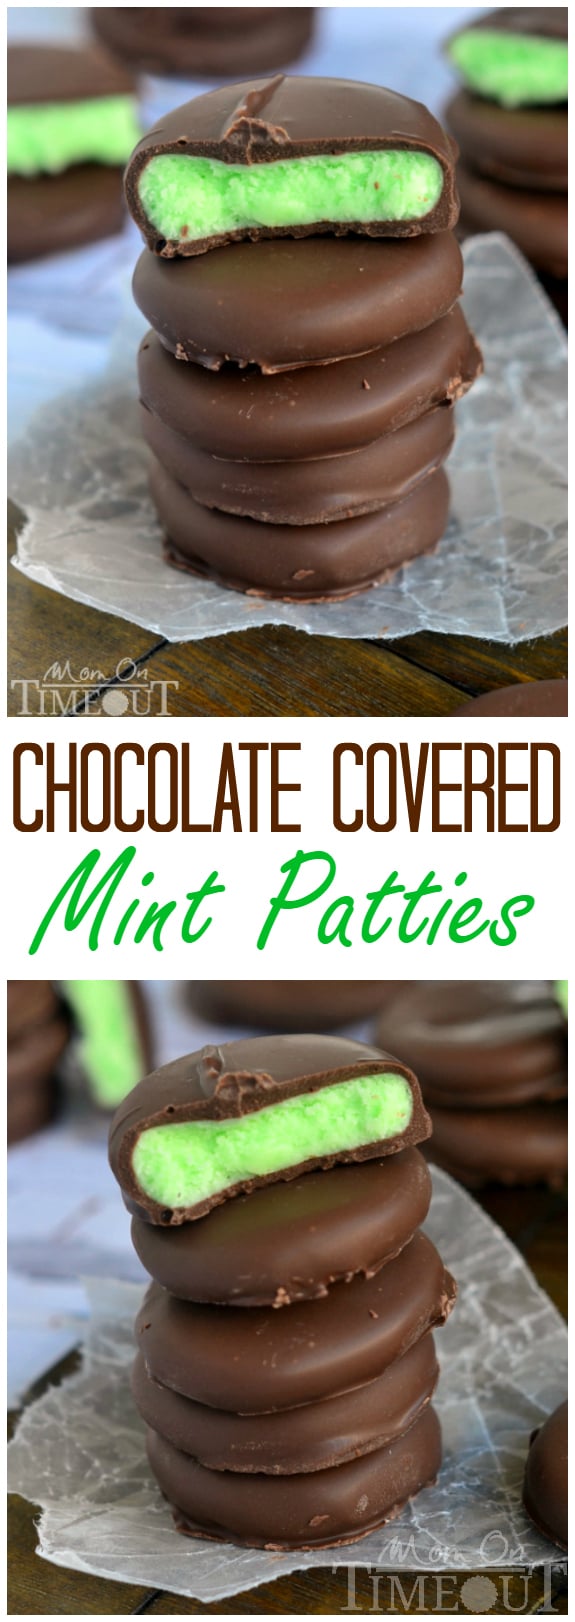 Rich and creamy, these Chocolate Covered Mint Patties are so easy to make and are incredibly scrumptious! | MomOnTimeout.com | #dessert #recipe #chocolate